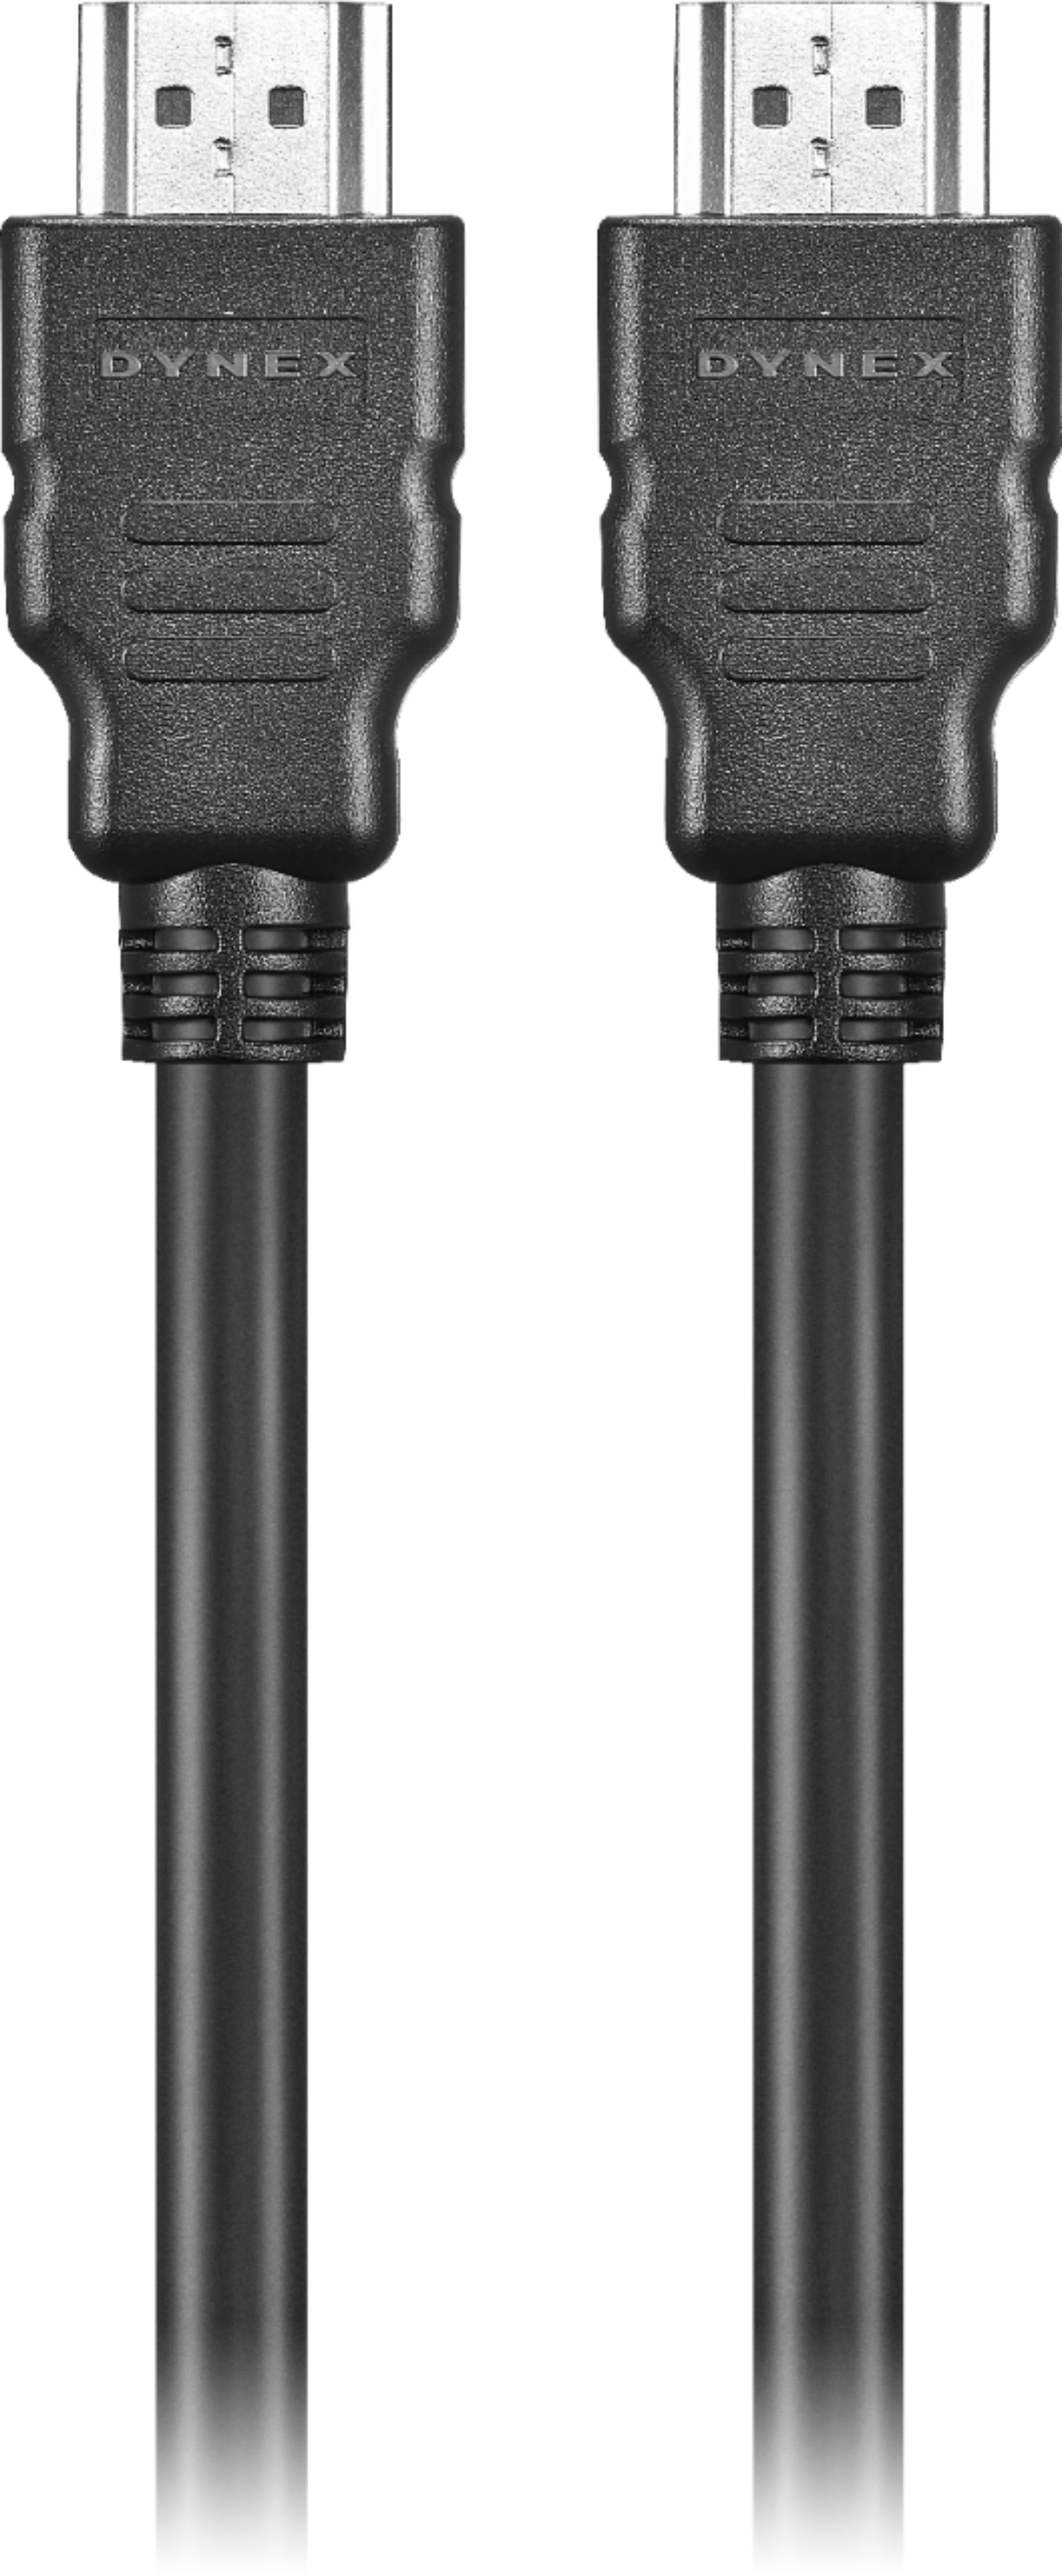 Best Buy: Dynex™ 6' HDMI Cable Black DX-SF1162